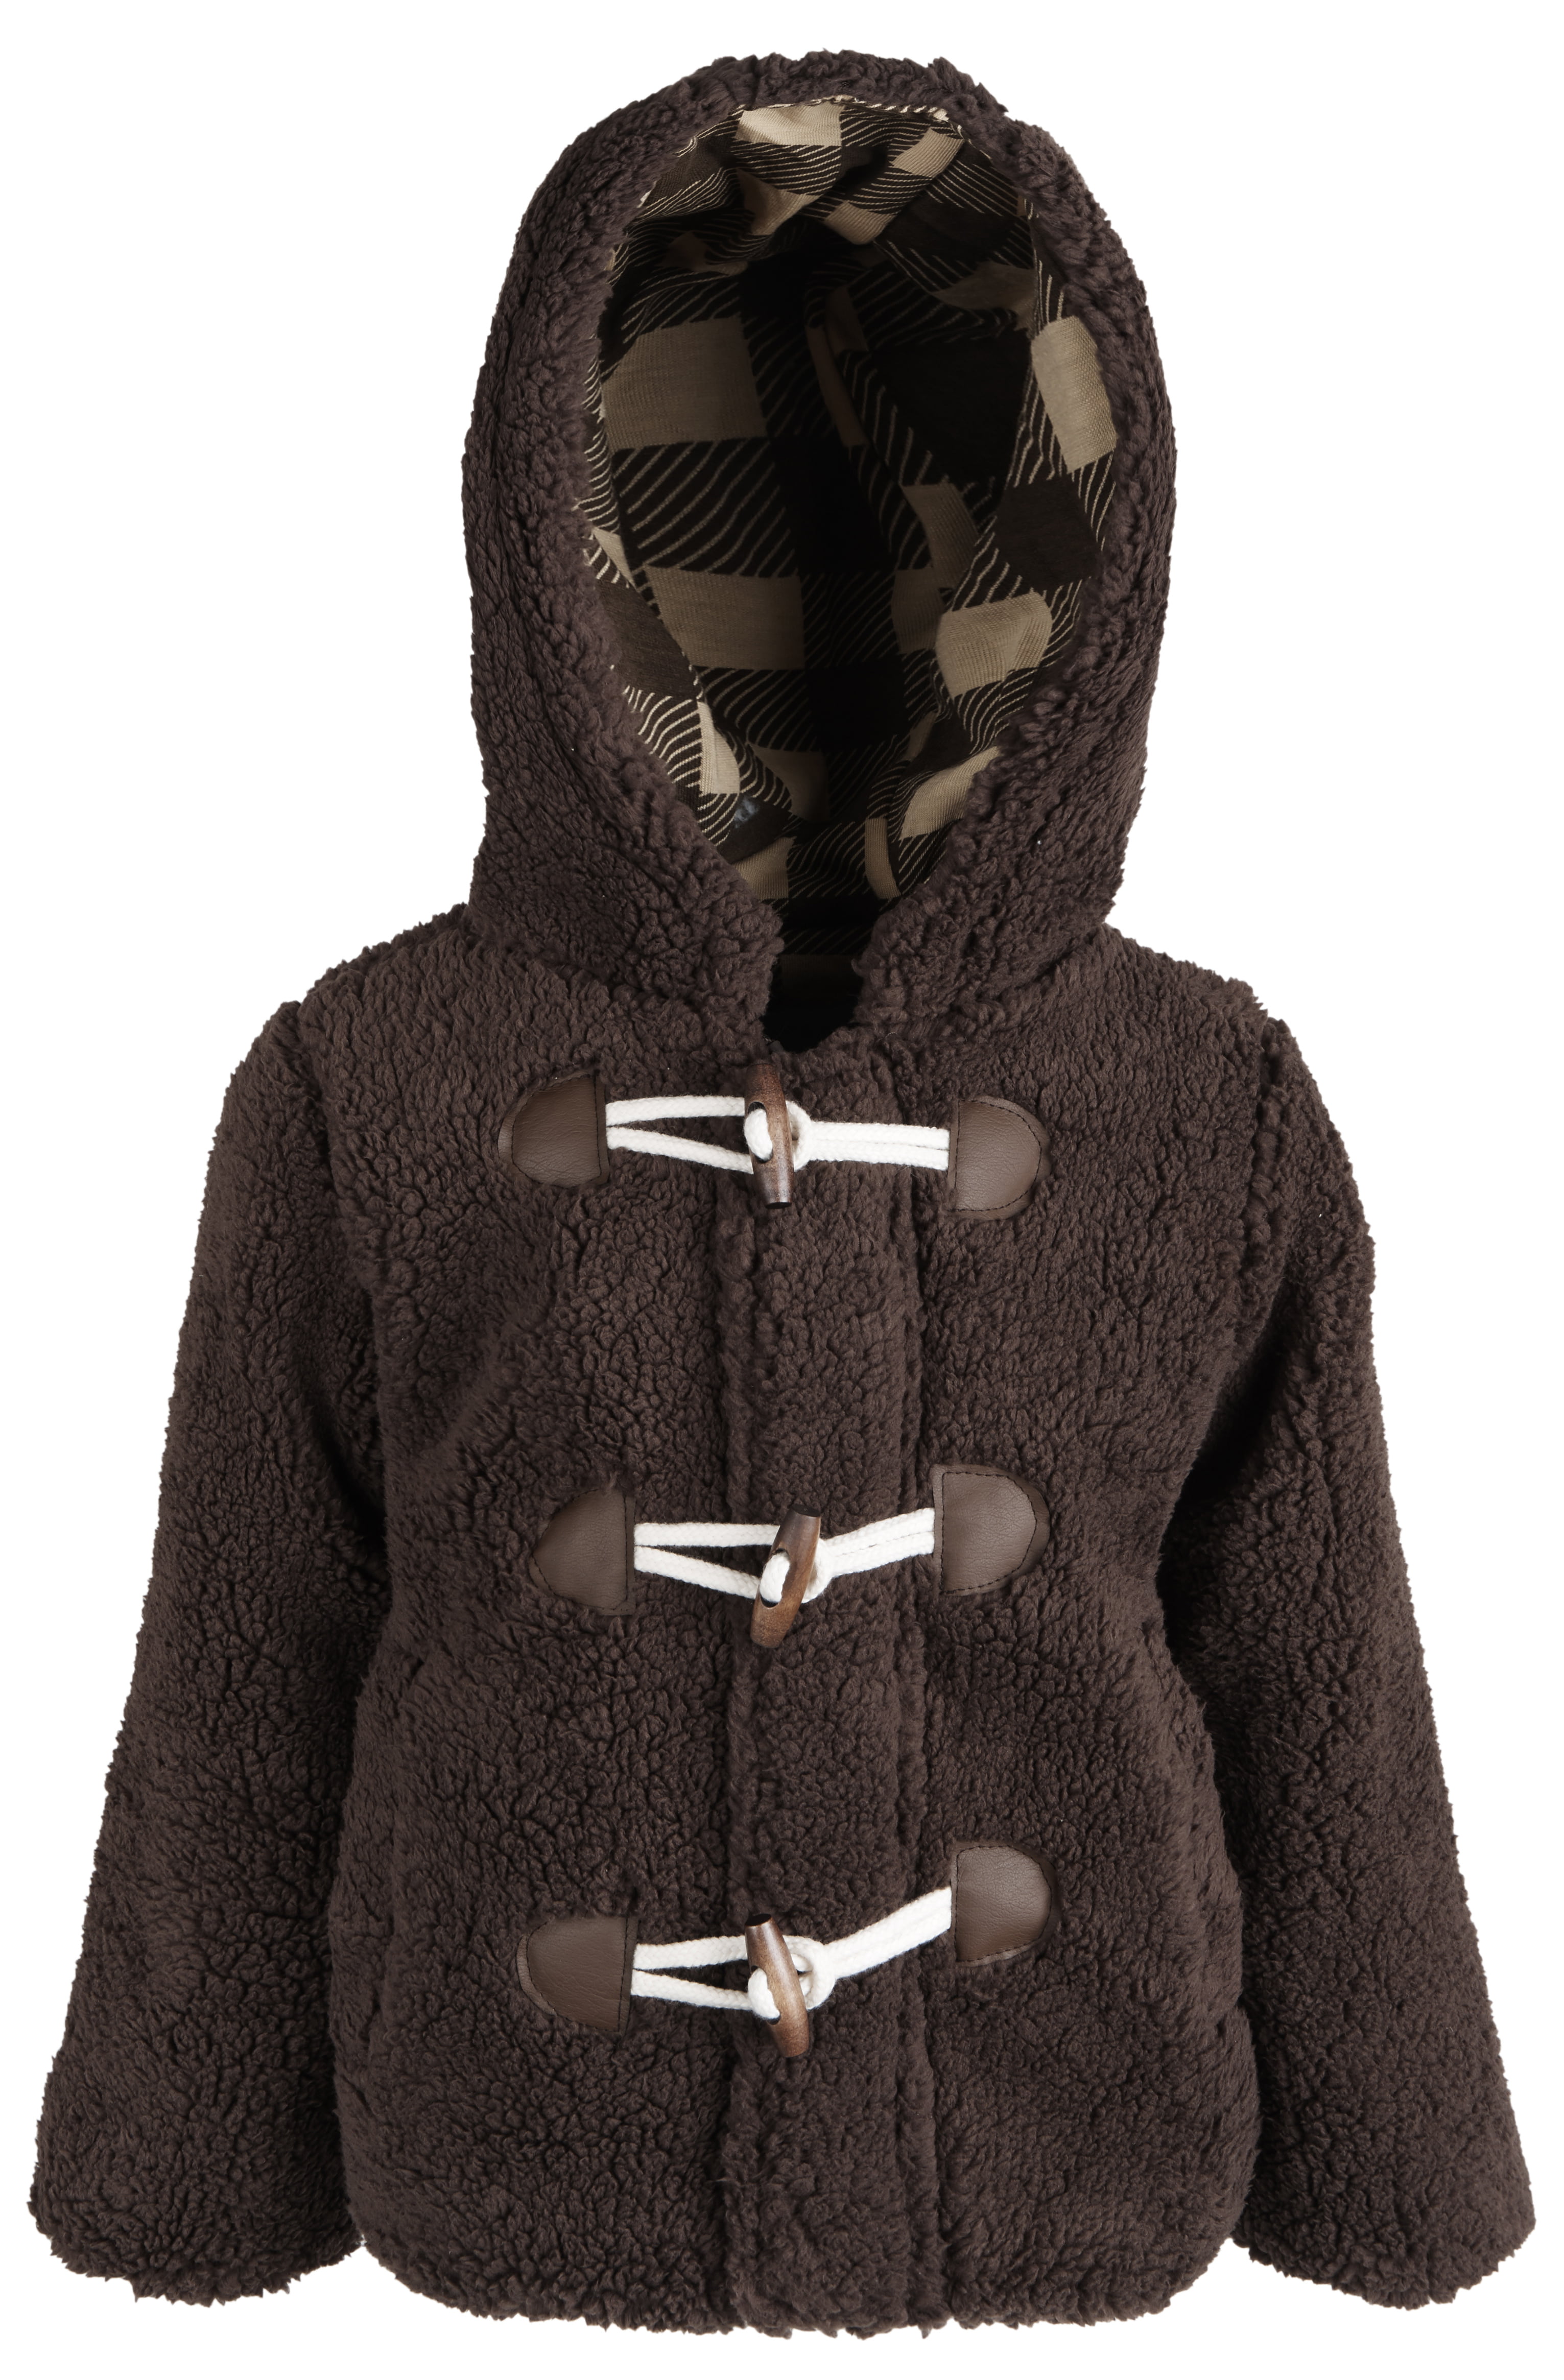 Wippette Faux Wool Toggle Jacket for Boys with Plaid Lined Hood 